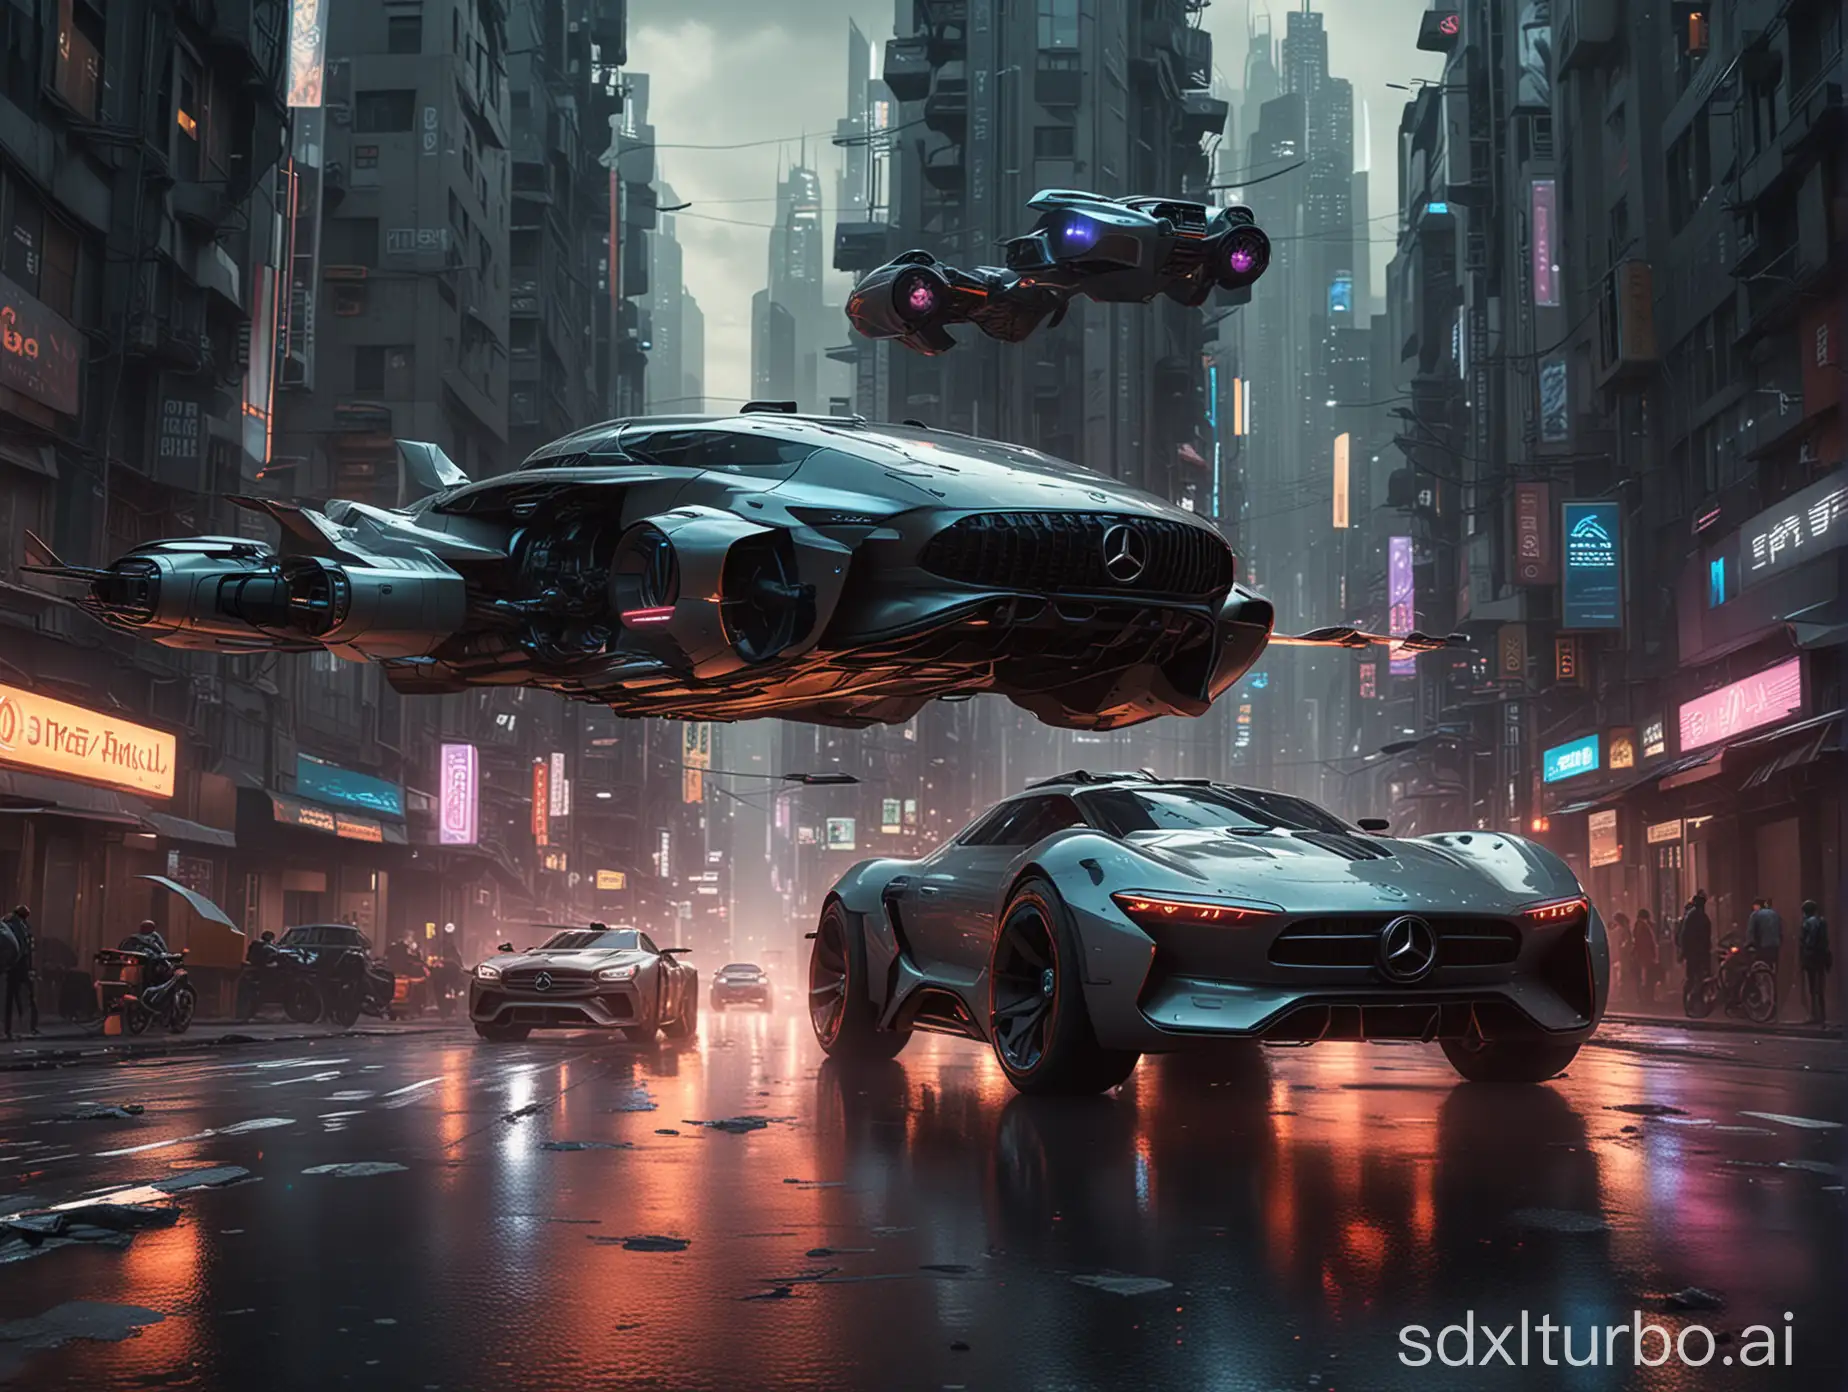 A digital illustration of a Mercedes vehicle navigating between various other flying vehicles as it zips down a bustling road cutting through a dense urban futuristic cityscape in the year 2050. Inspired by Syd Mead's concept art and the vibrant neon worlds of Blade Runner, Tron and Ghost in the Shell. Rendered at 16:9 aspect ratio at 8K resolution using Octane Render with realistic exhaust trails and HDR lighting to capture the intense neon glow.